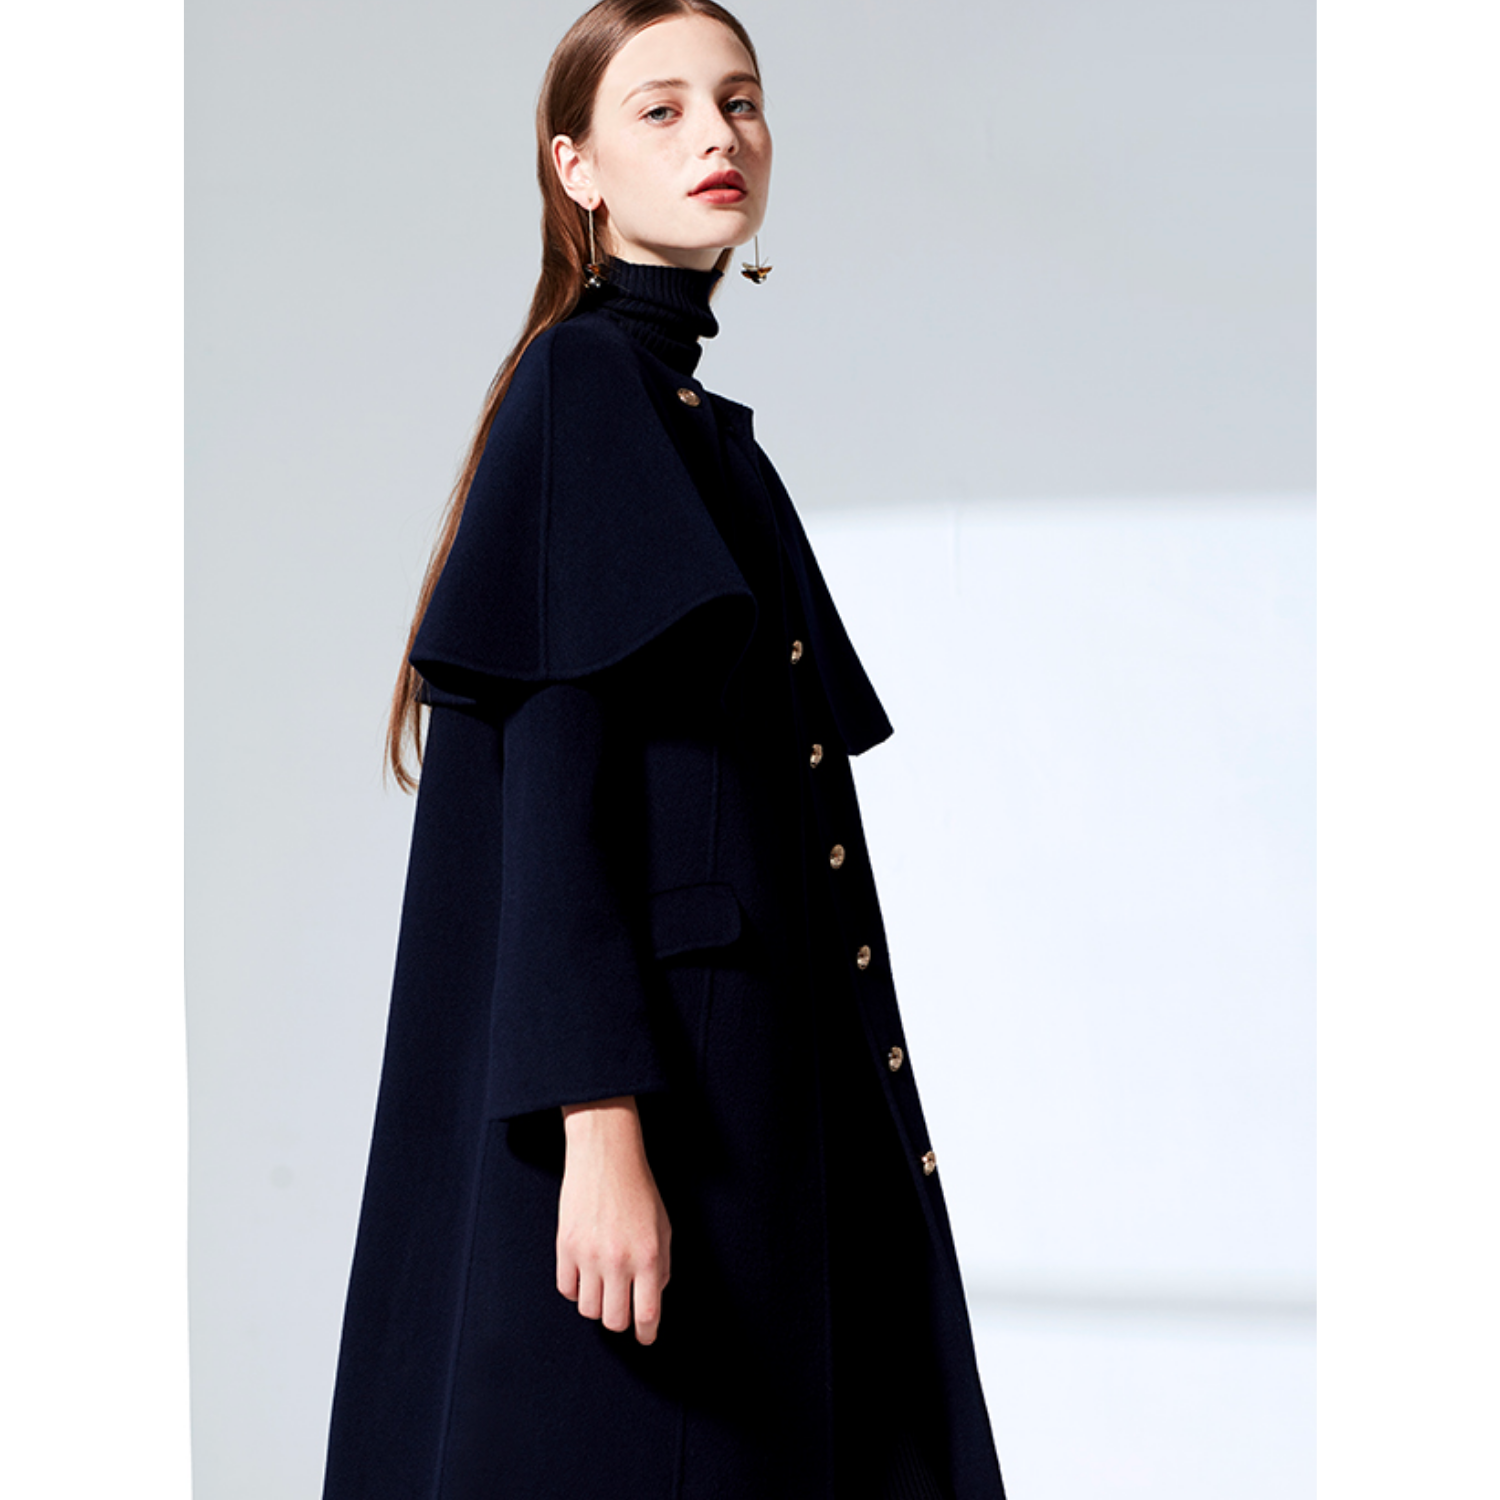 Zalinah White Military Style Long Coat With Removable Cape - Navy